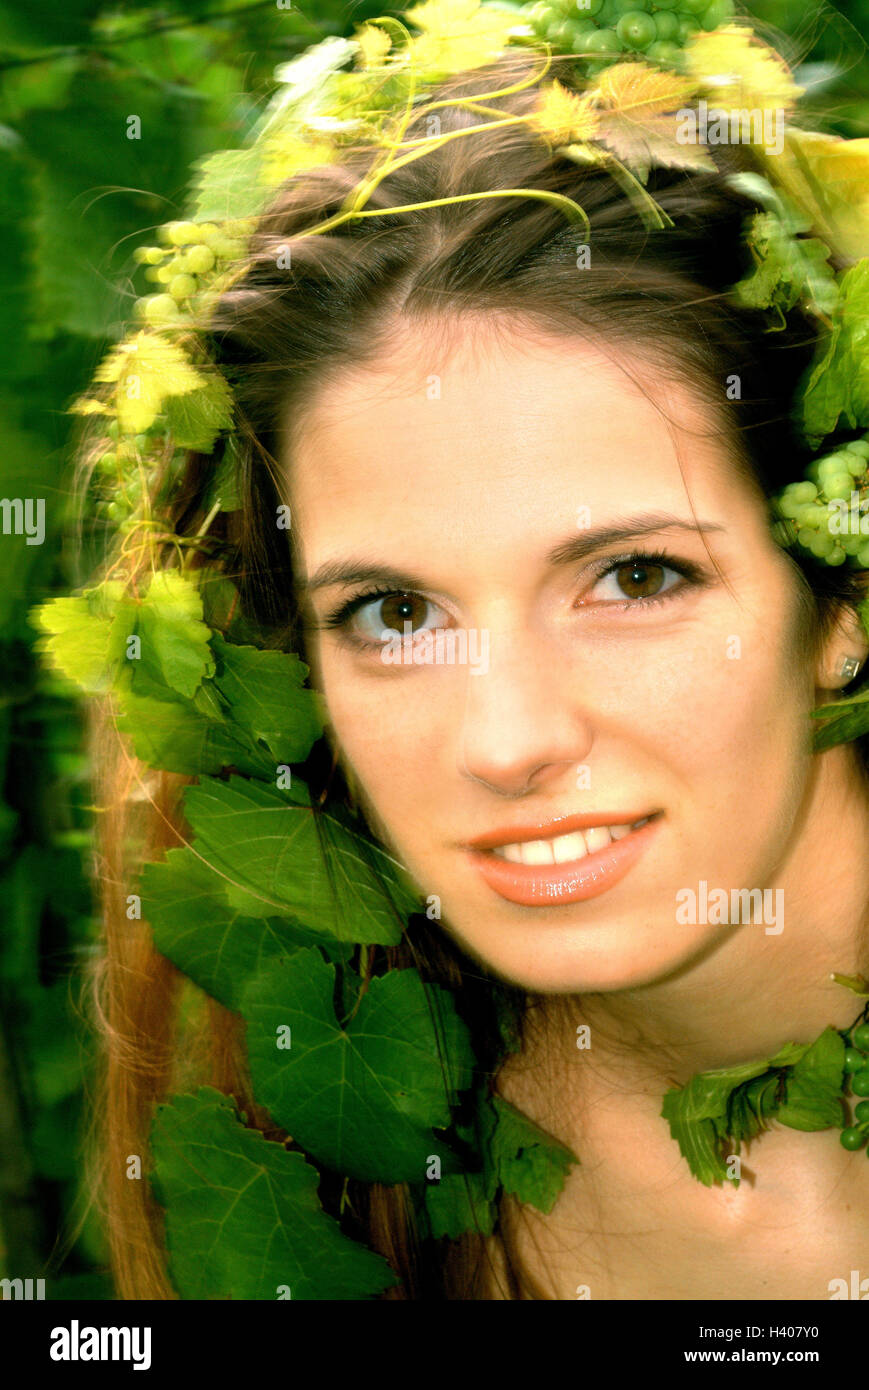 Wine queen, smile, hair ornament, portrait, blur woman, young, adults, 20-25 years, 20-30 years, 25-30 years, beauty, naturalness, wine leaves, grapes, queen, culture, tradition, representative, representation, represent, vineyard, viticulture, wine-growi Stock Photo